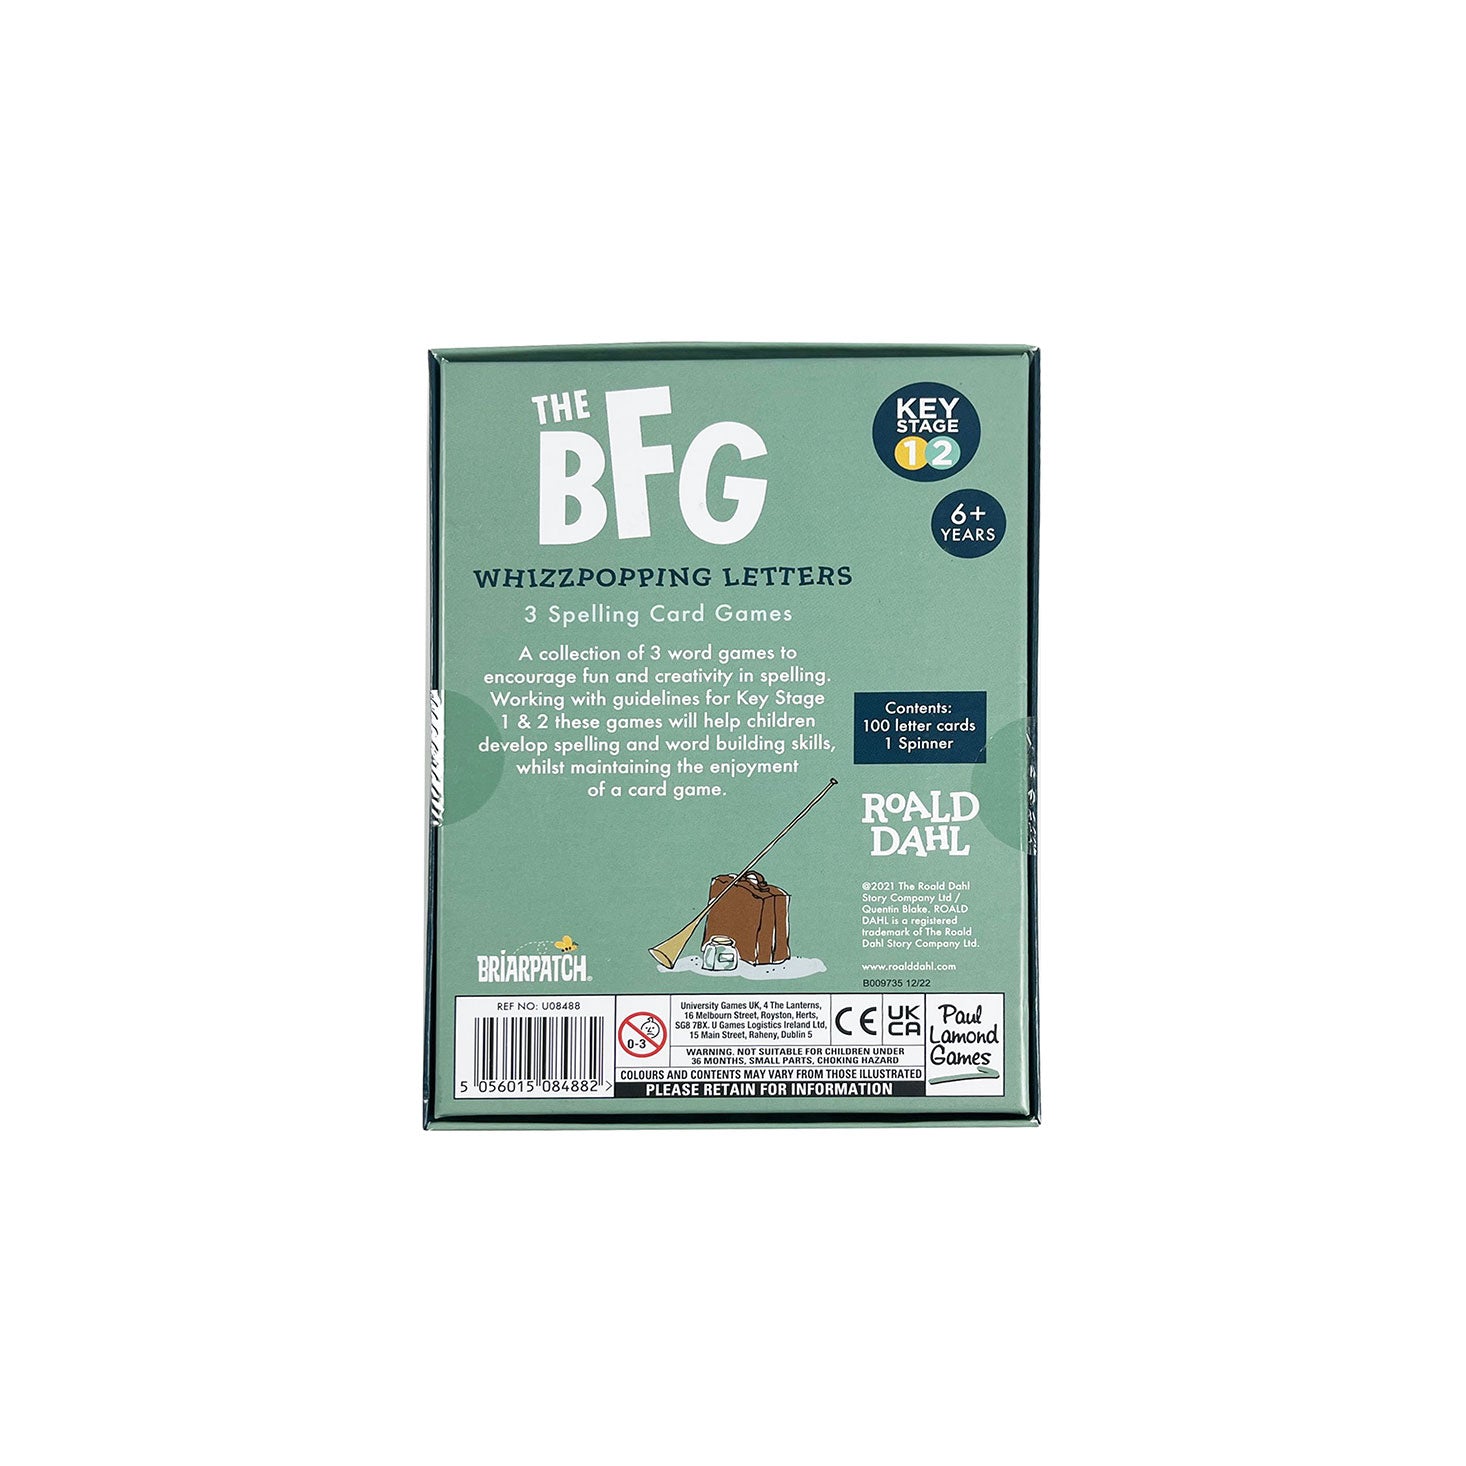 Back view of The BFG Whizzpopping Letters game